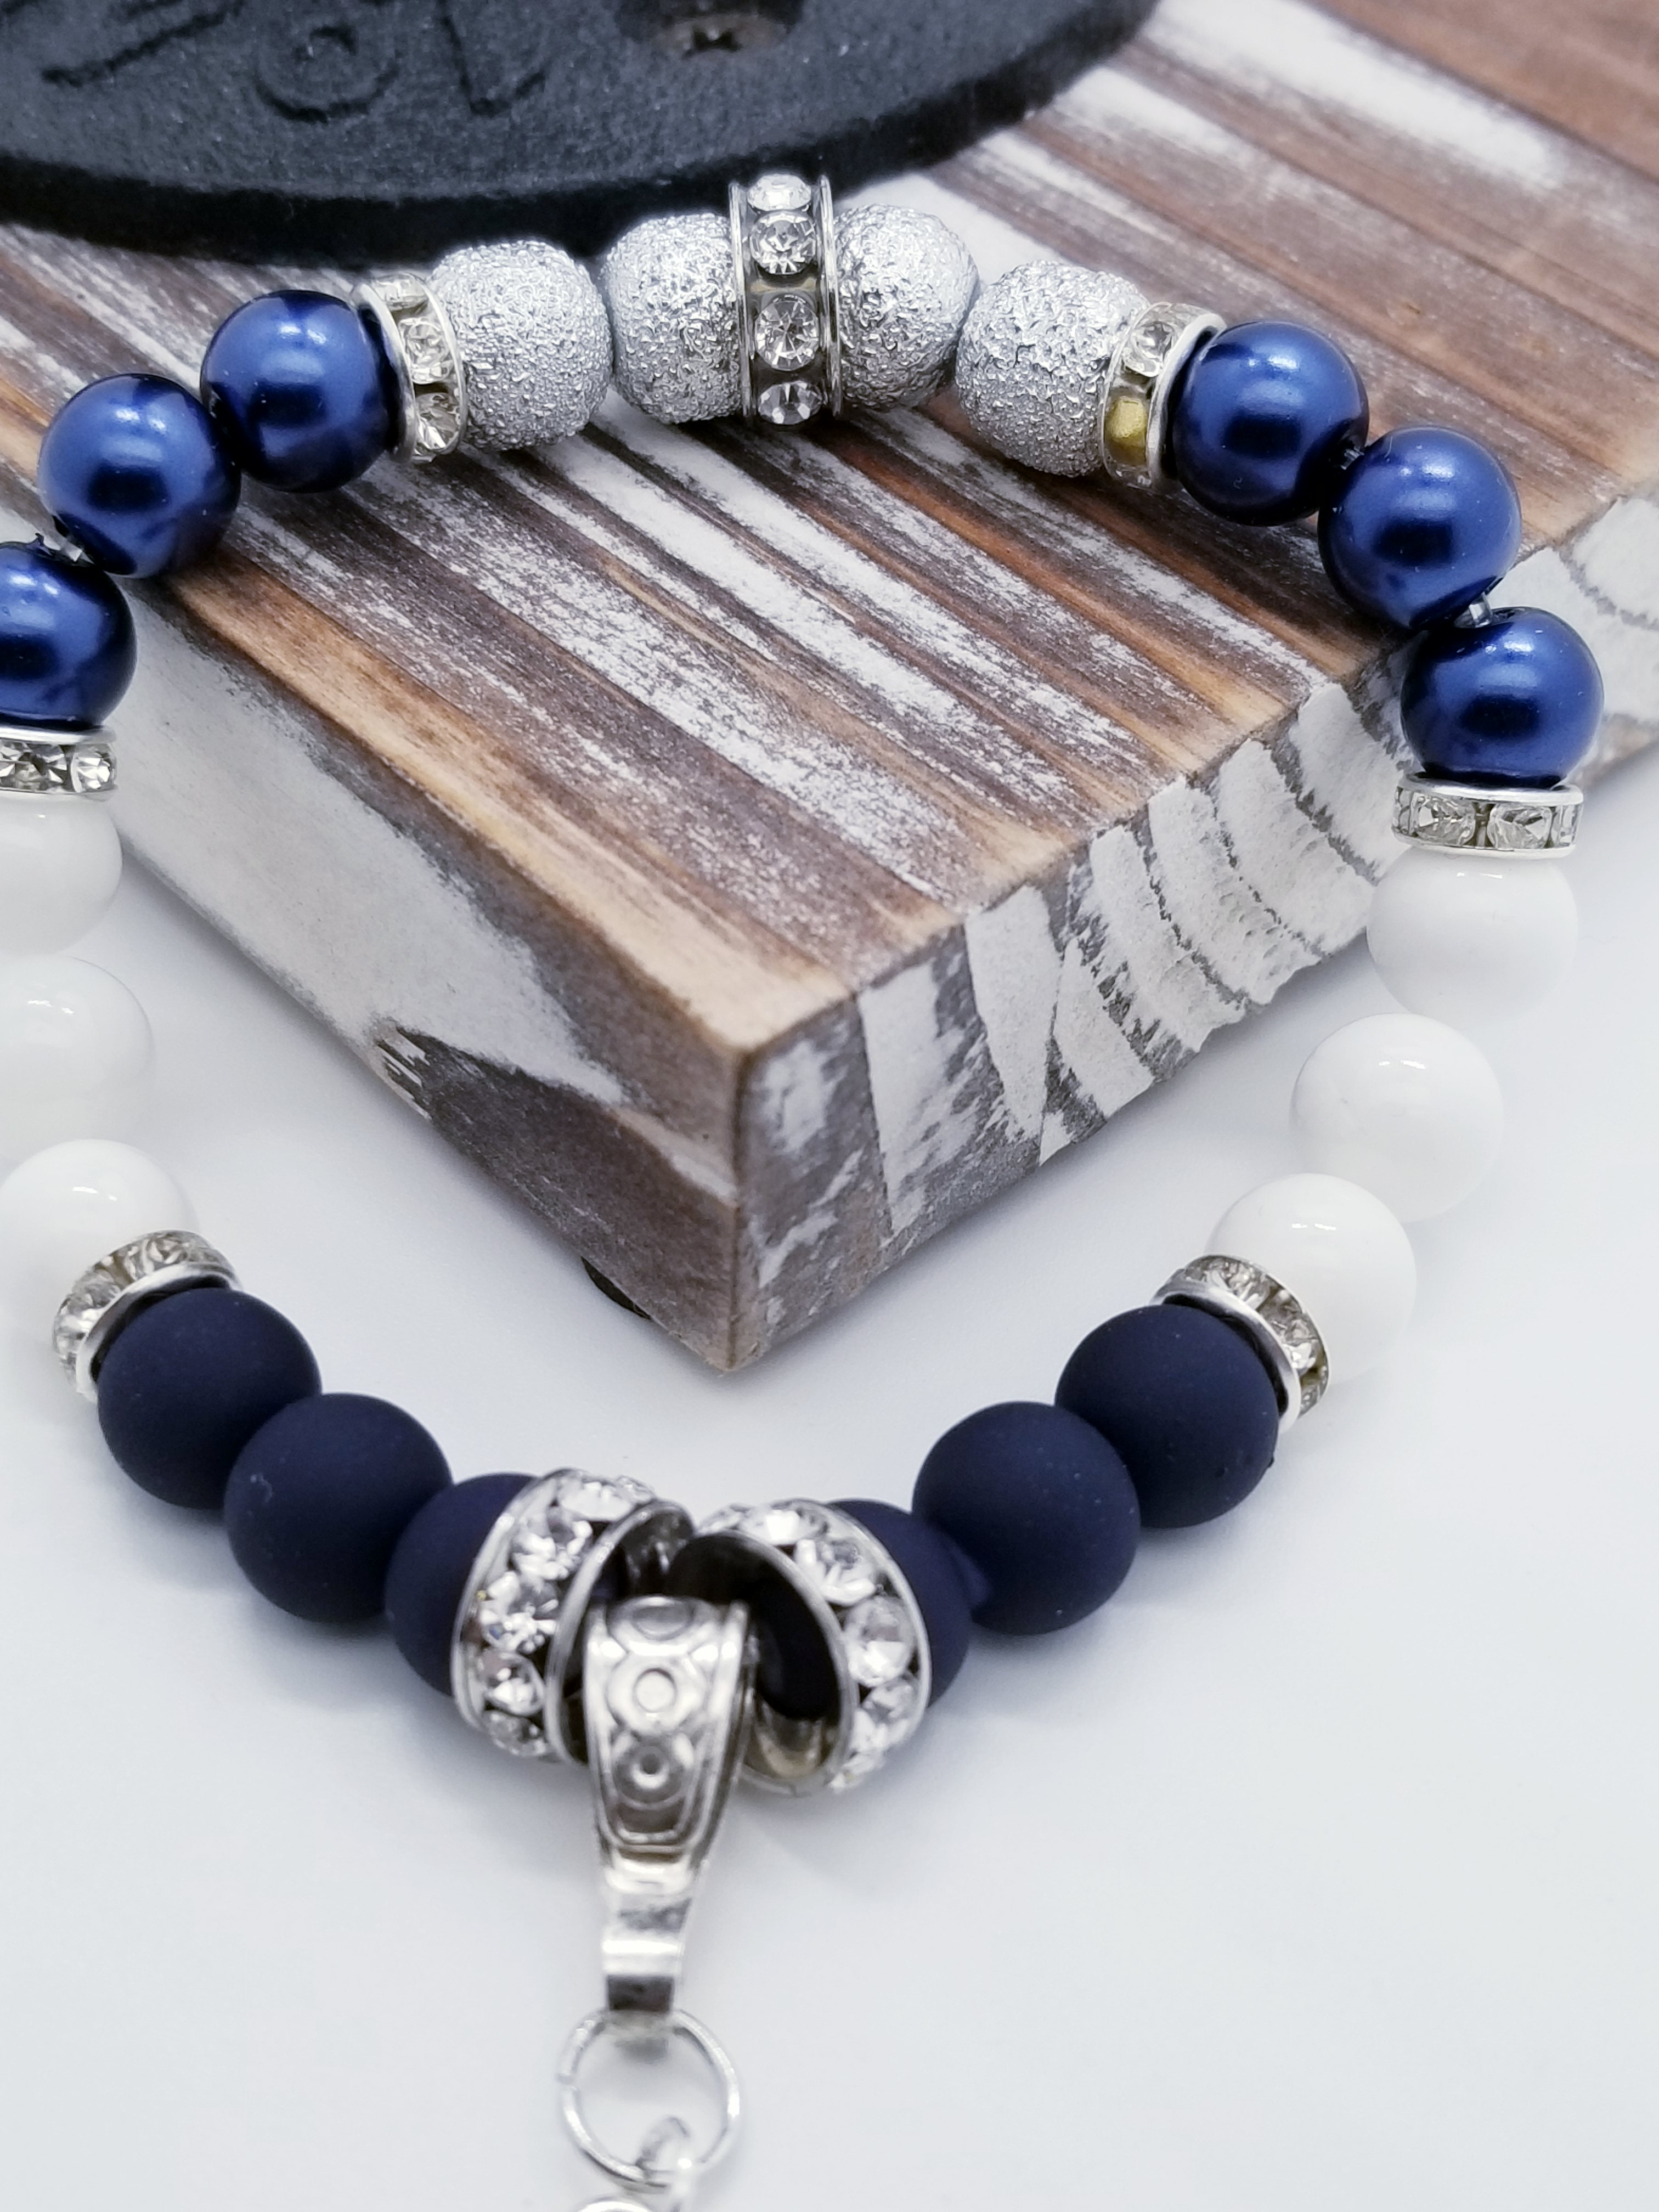 Integrity, Self Service, and Excellence (US Air Force core values) inspired bracelet to honor our troops, veterans, and the families that support them! "Air Force" charm with navy matte glass beads, white turquoise beads, indigo matte metallic beads, silver textured beads, and grade A rondel (silver rhinestone).